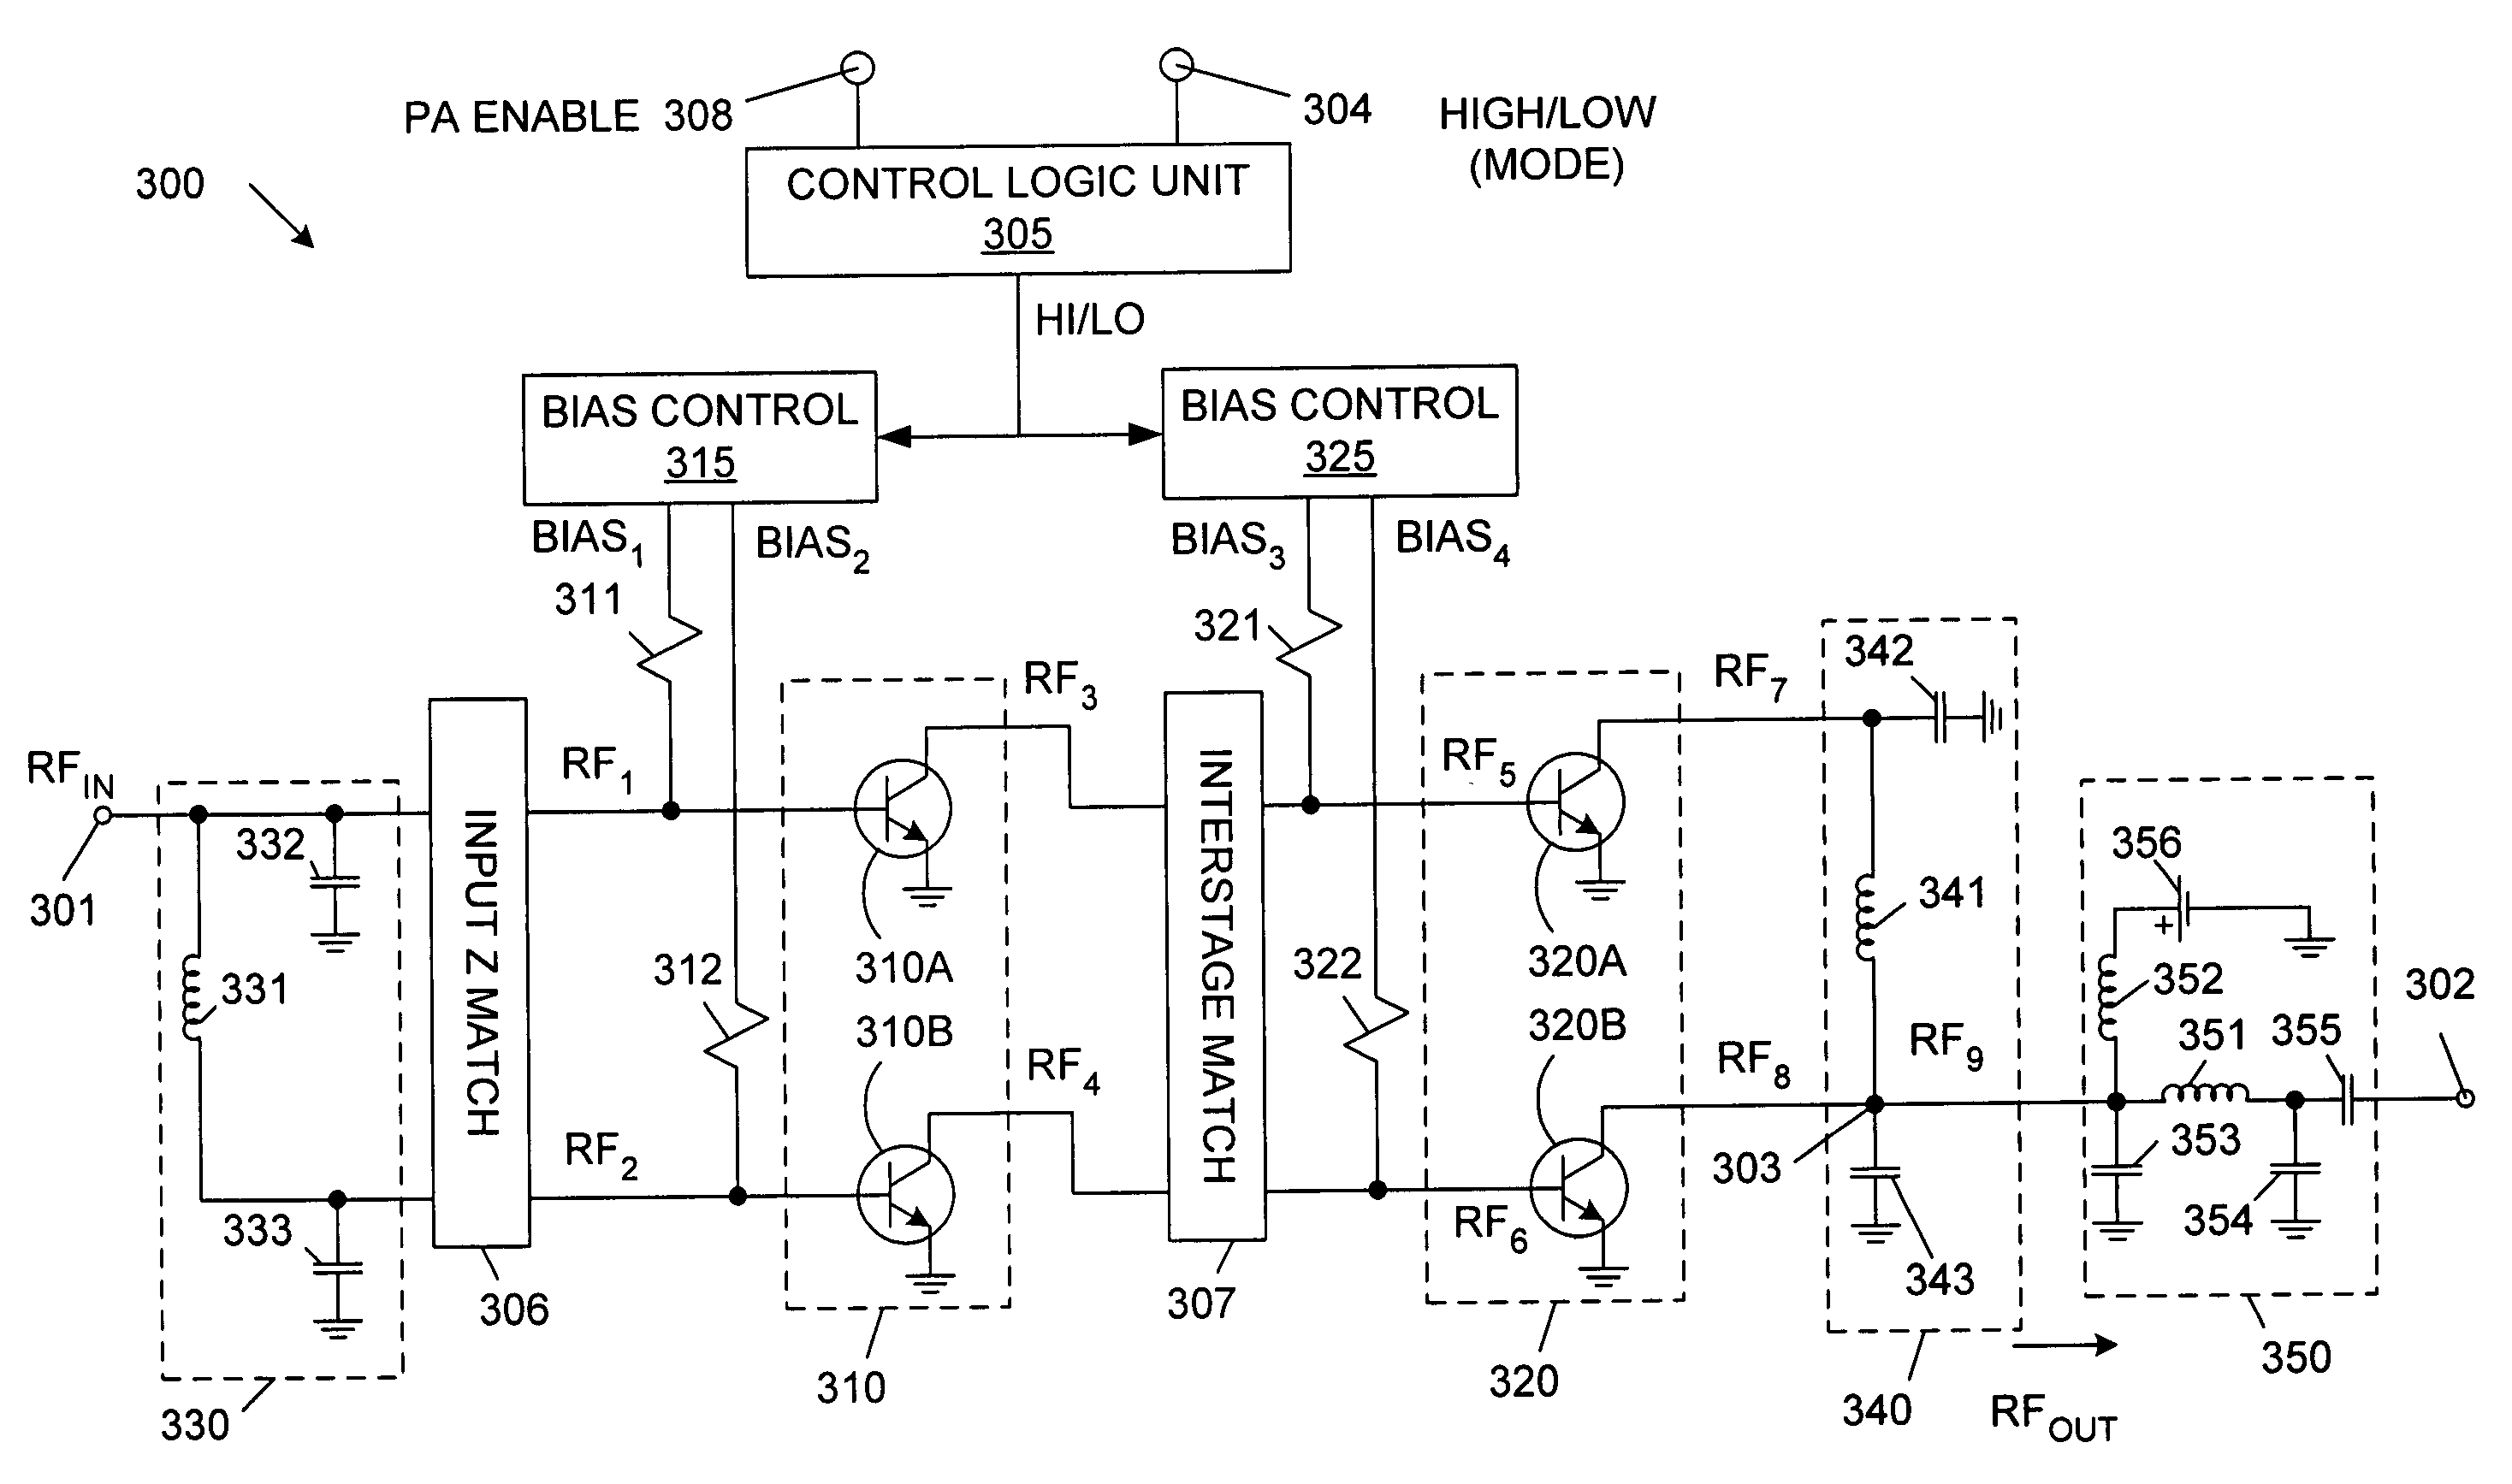 Linear power amplifier with multiple output power levels